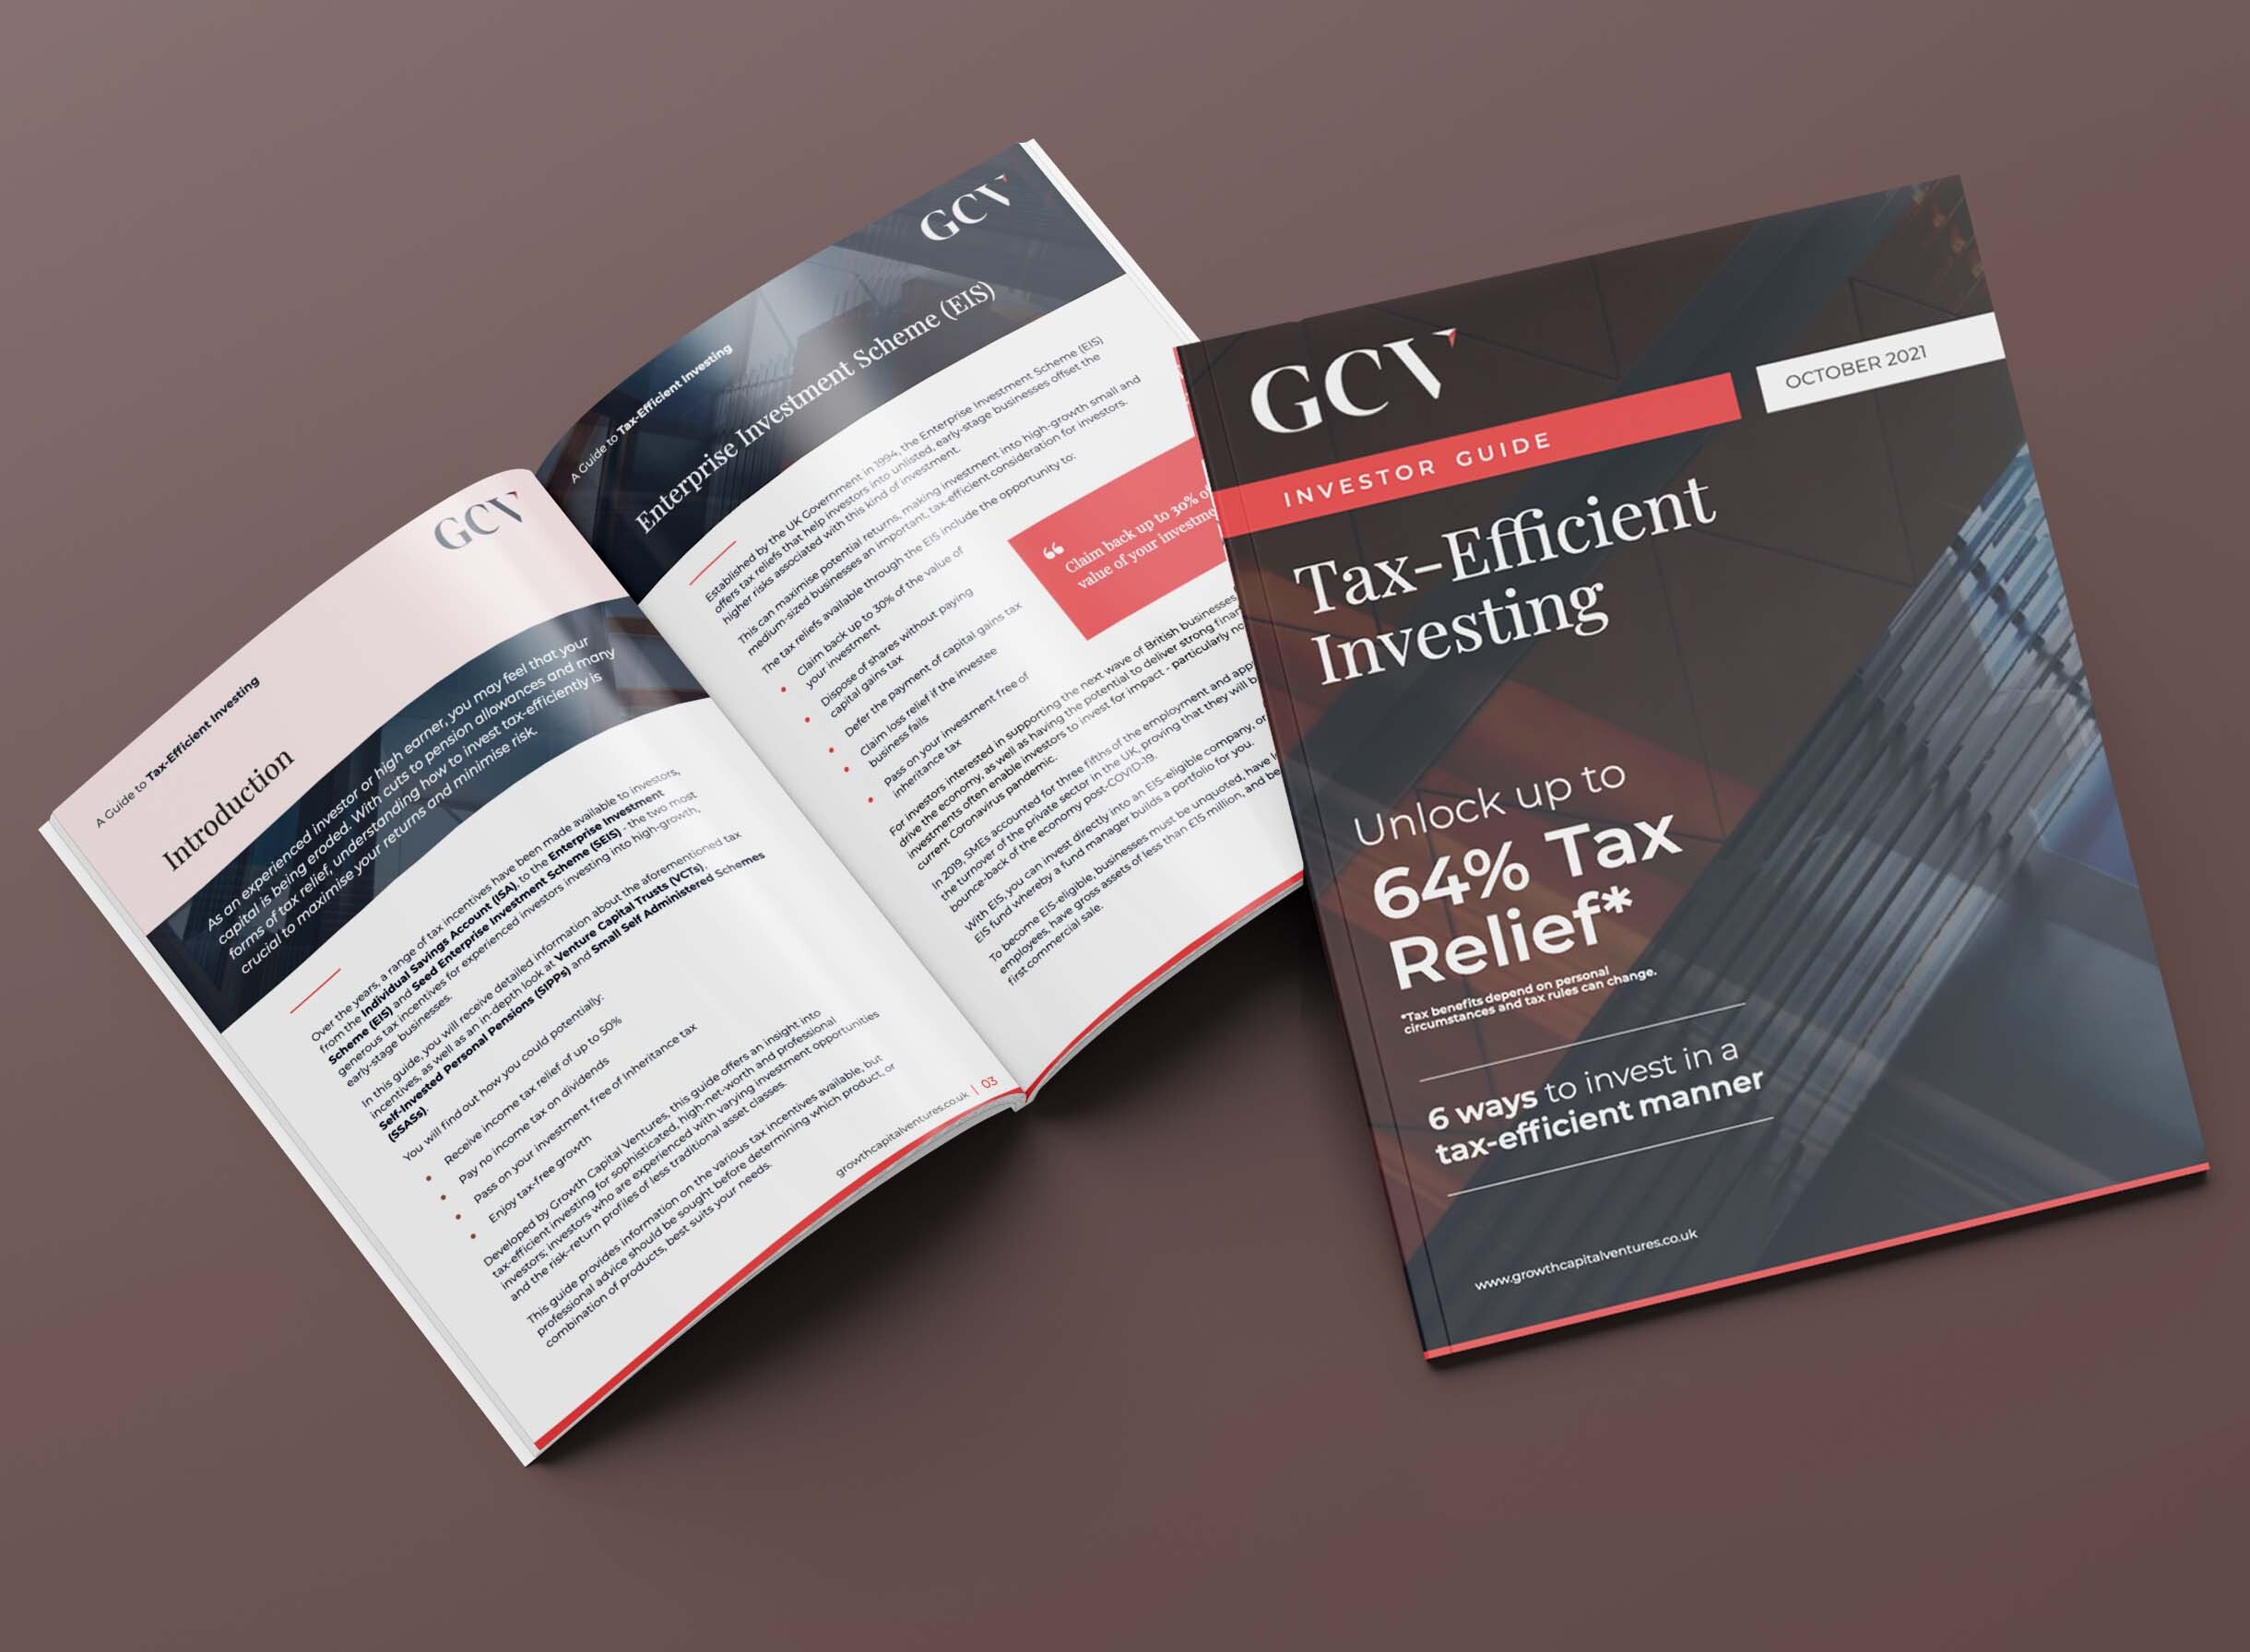 Tax efficient investing guide 